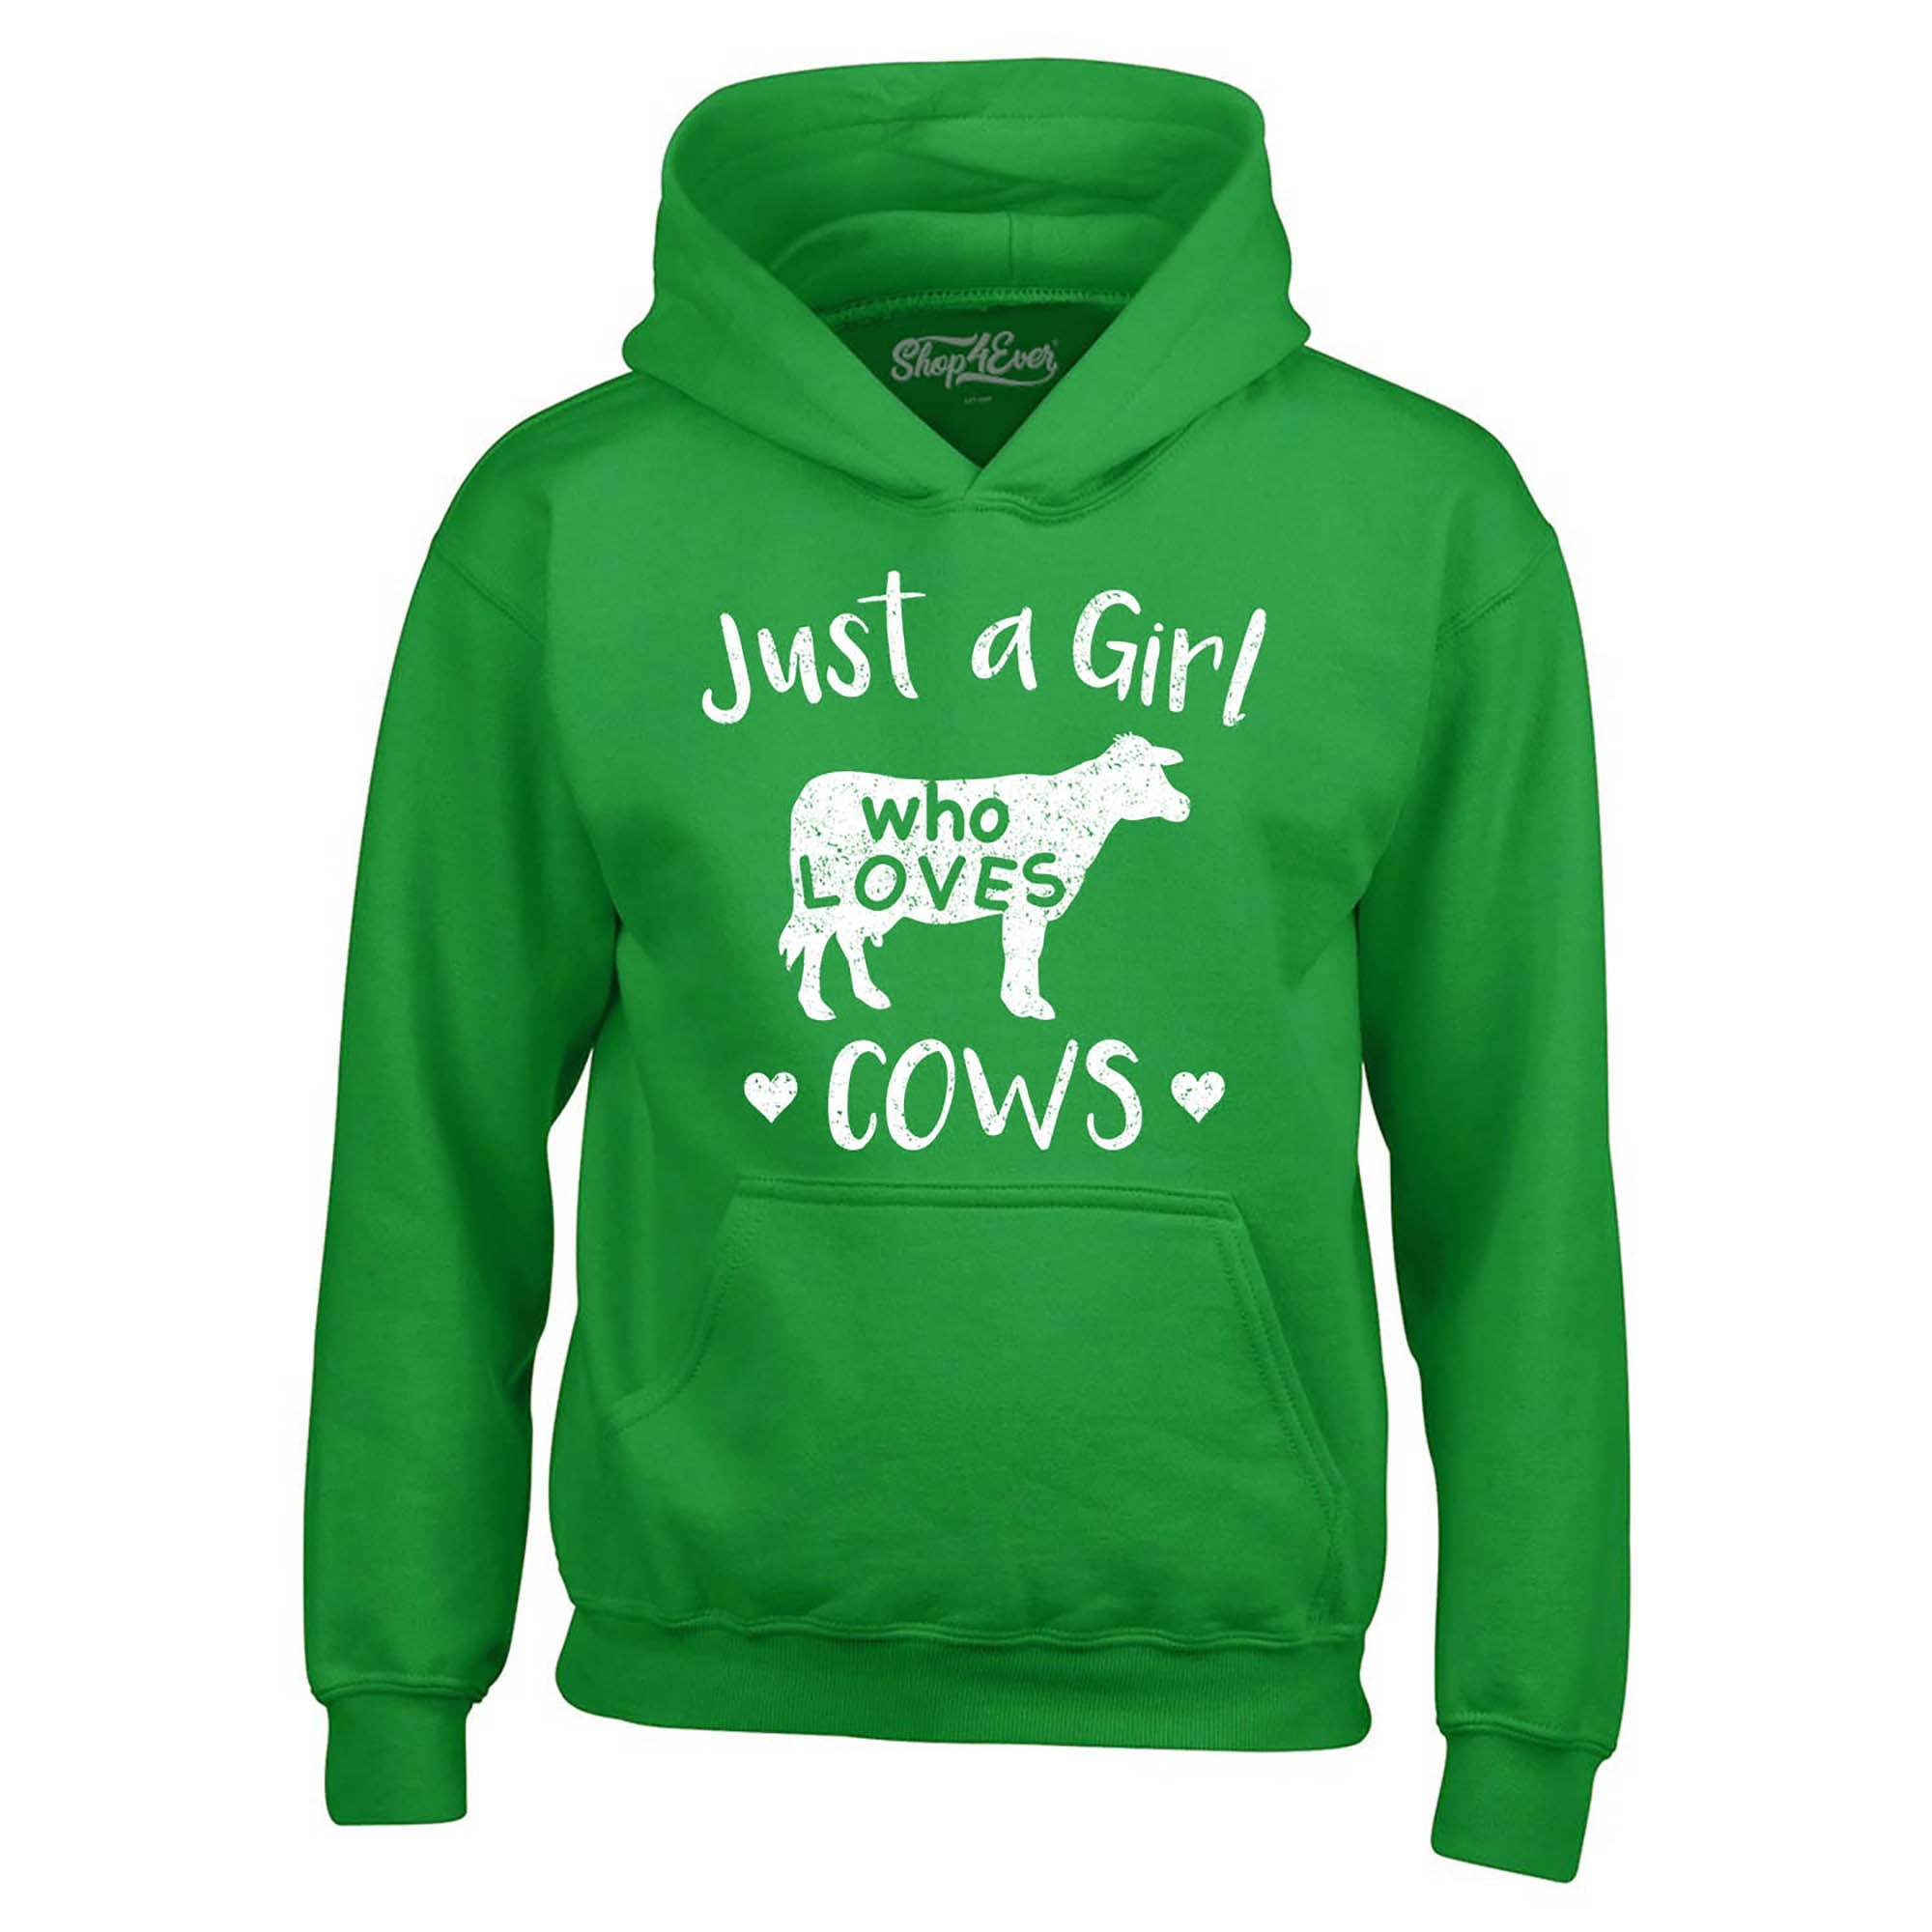 Just A Girl Who Loves Cows Hoodie Sweatshirts